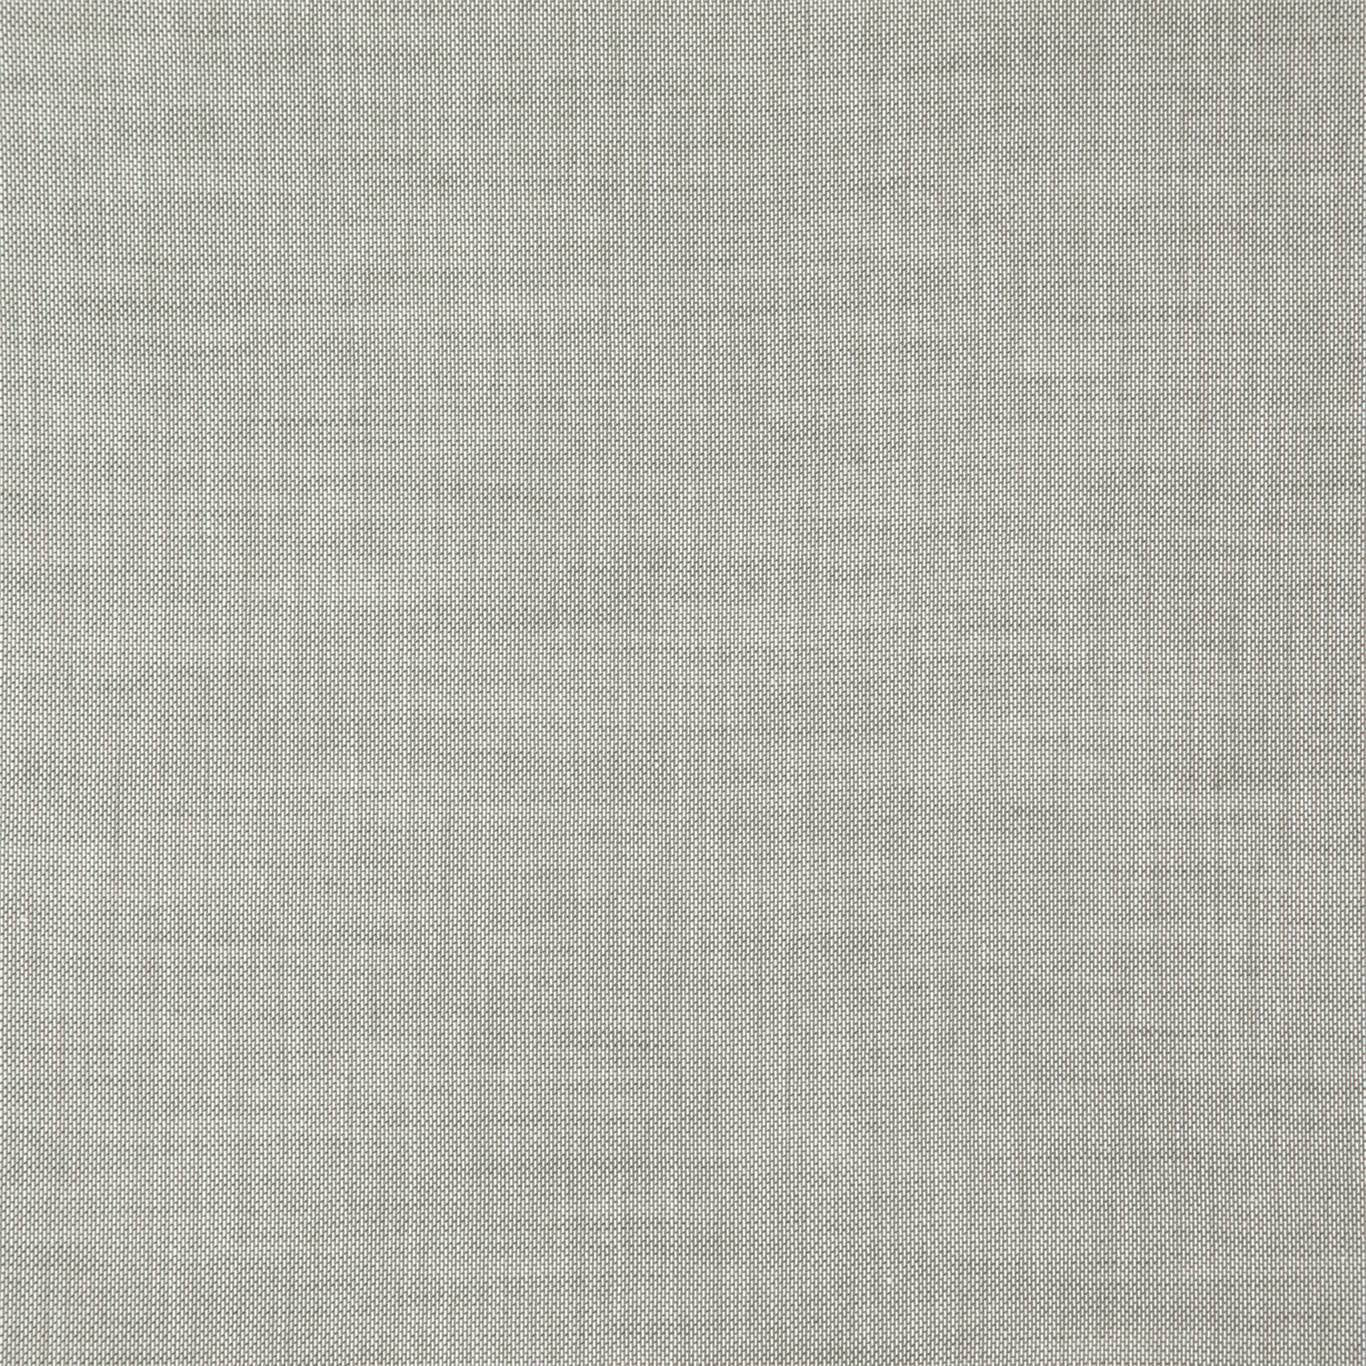 Chance Fabric by Harlequin - HHAR143058 - Shadow